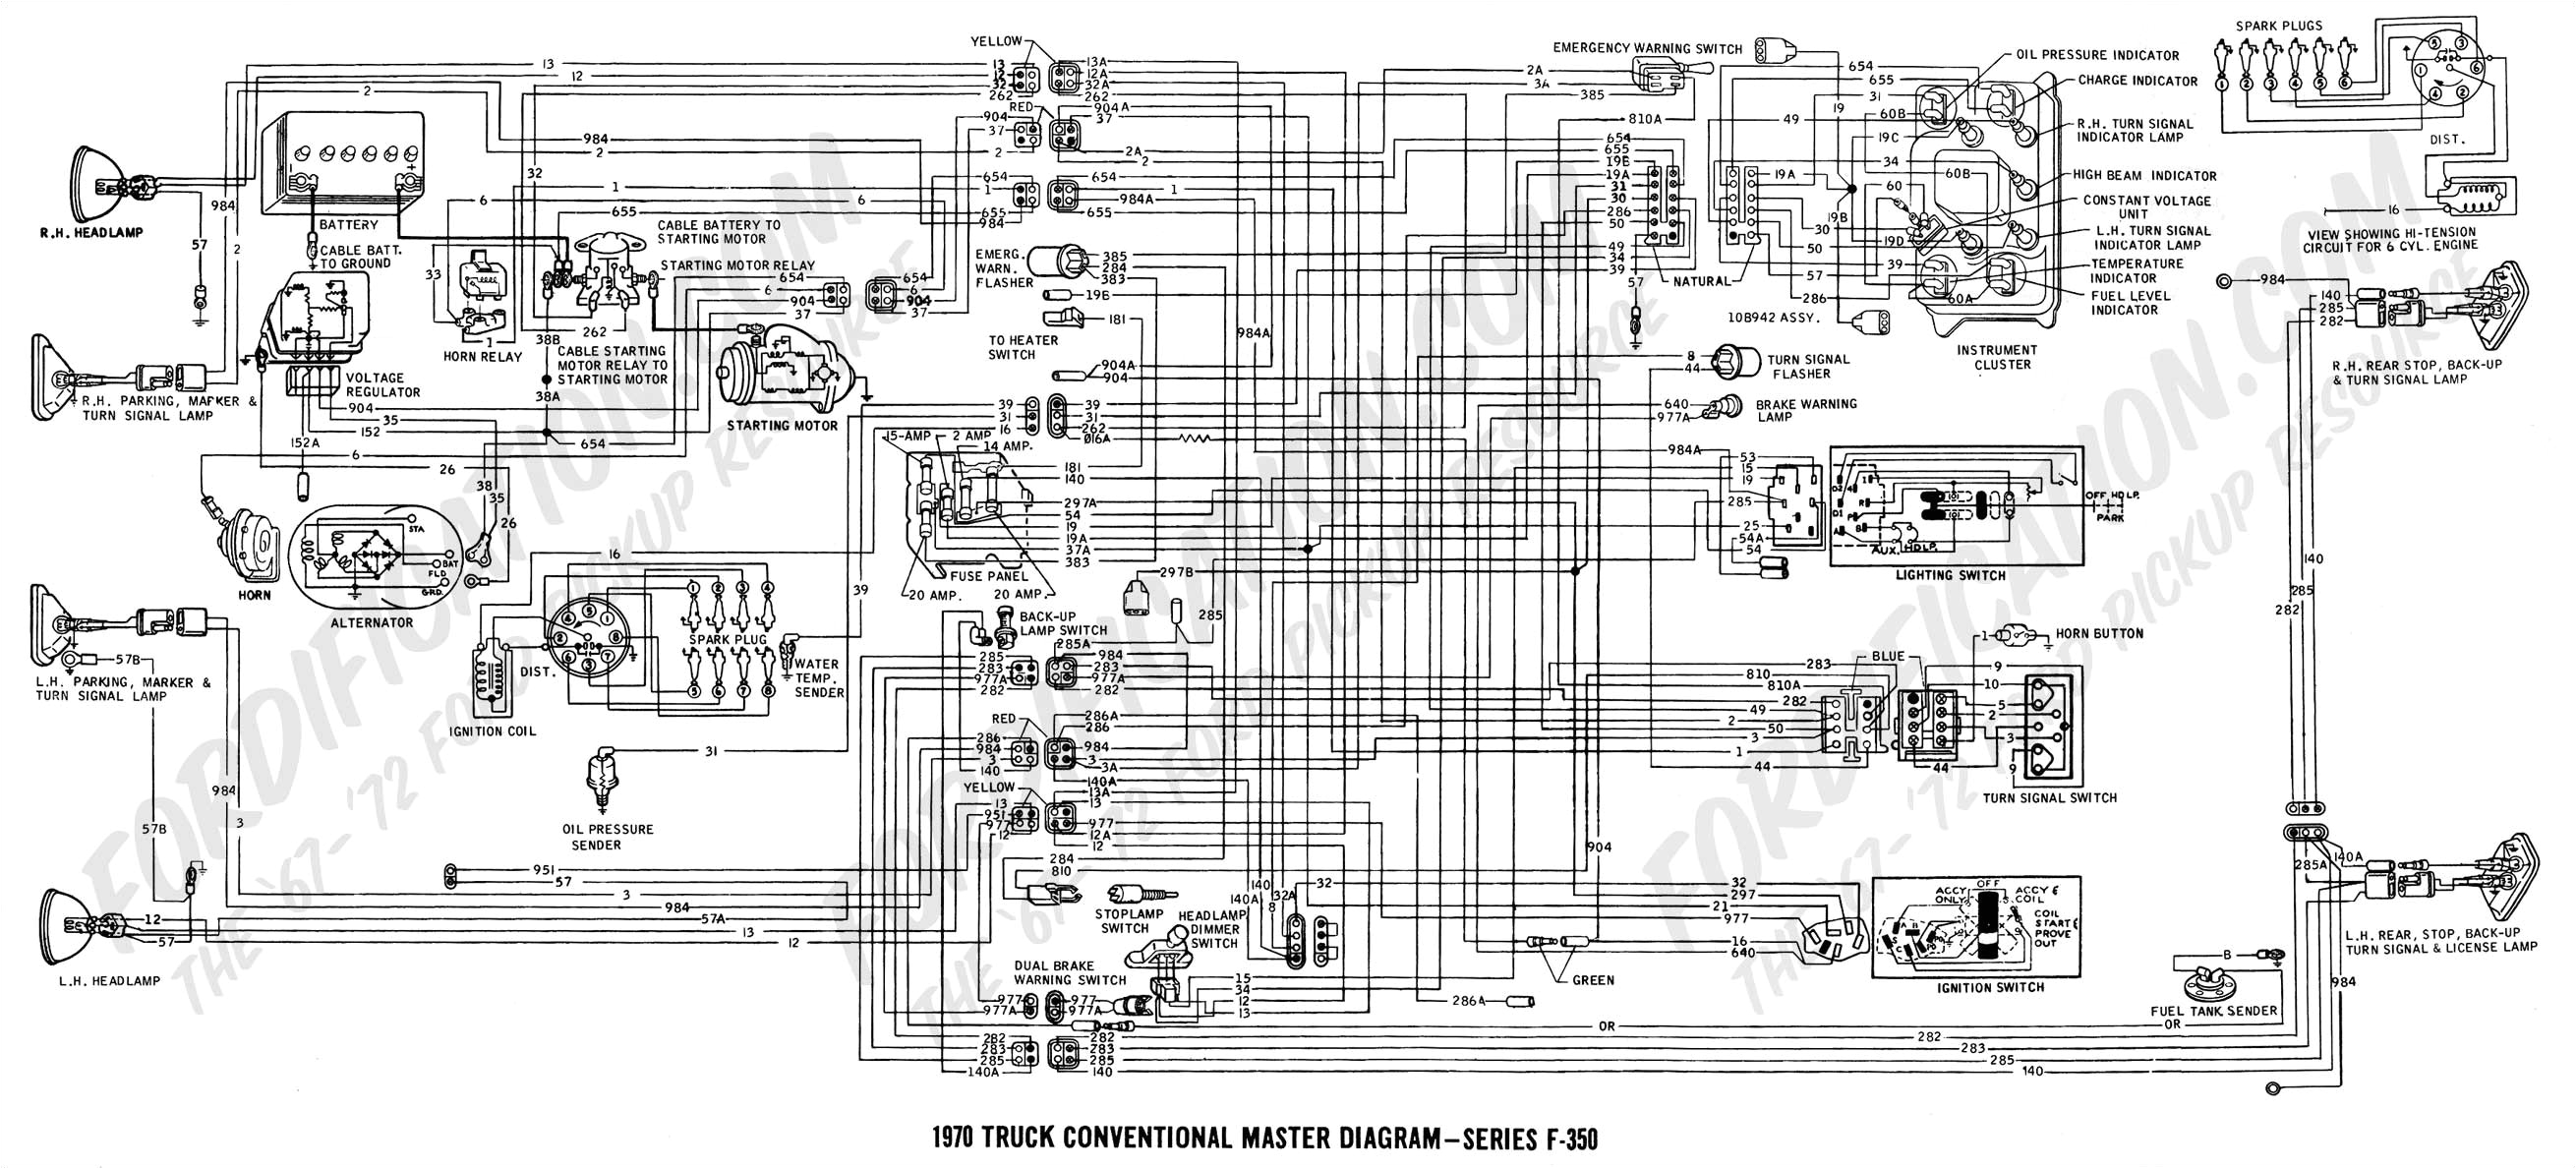 2005 f250 ac diagram wiring diagram name wiring diagram for 2005 ford f250